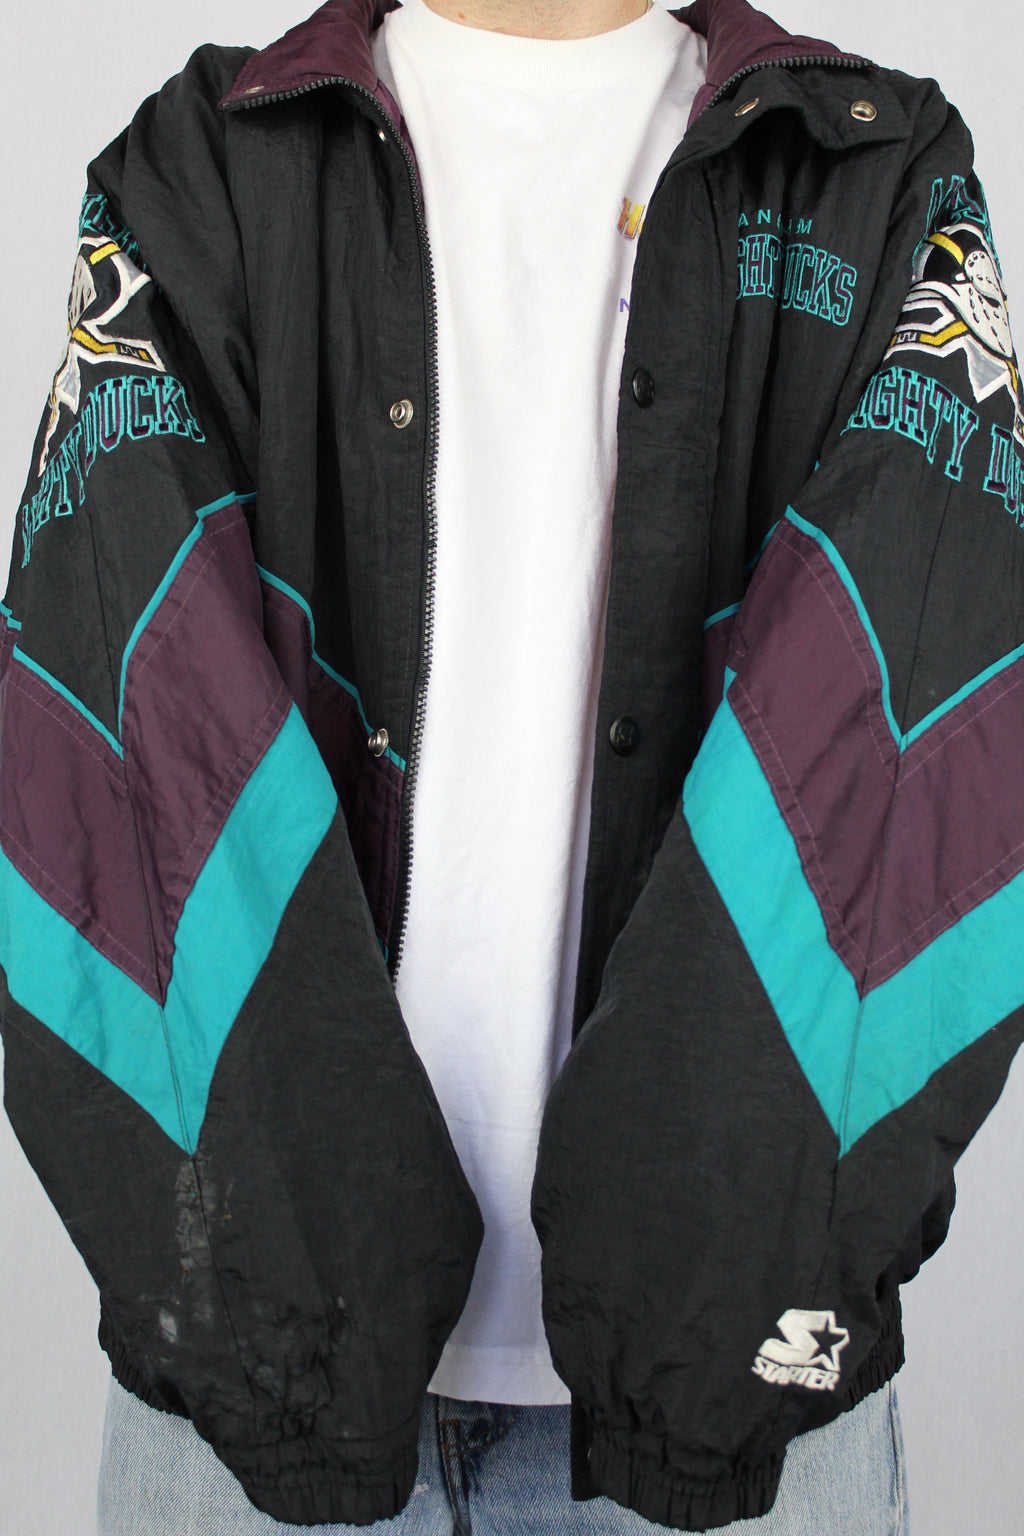 Mighty Ducks jacket – Recycle Boutique